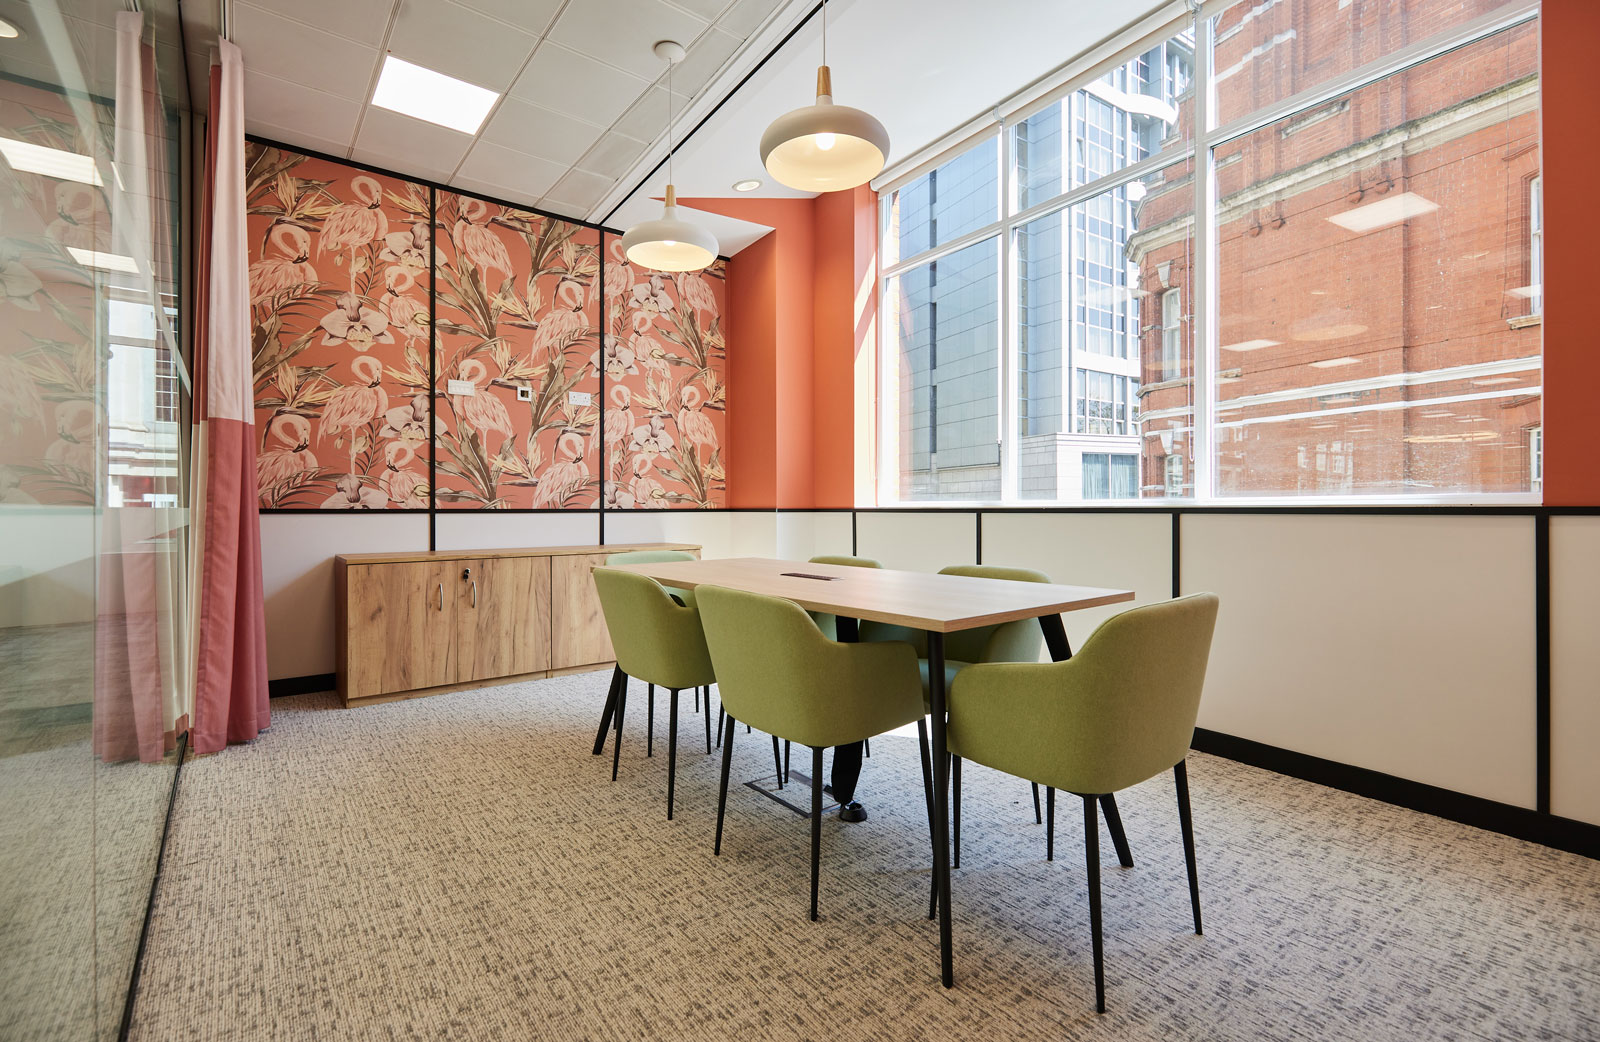 Meeting room with soft seating and pink flamingo wallpaper